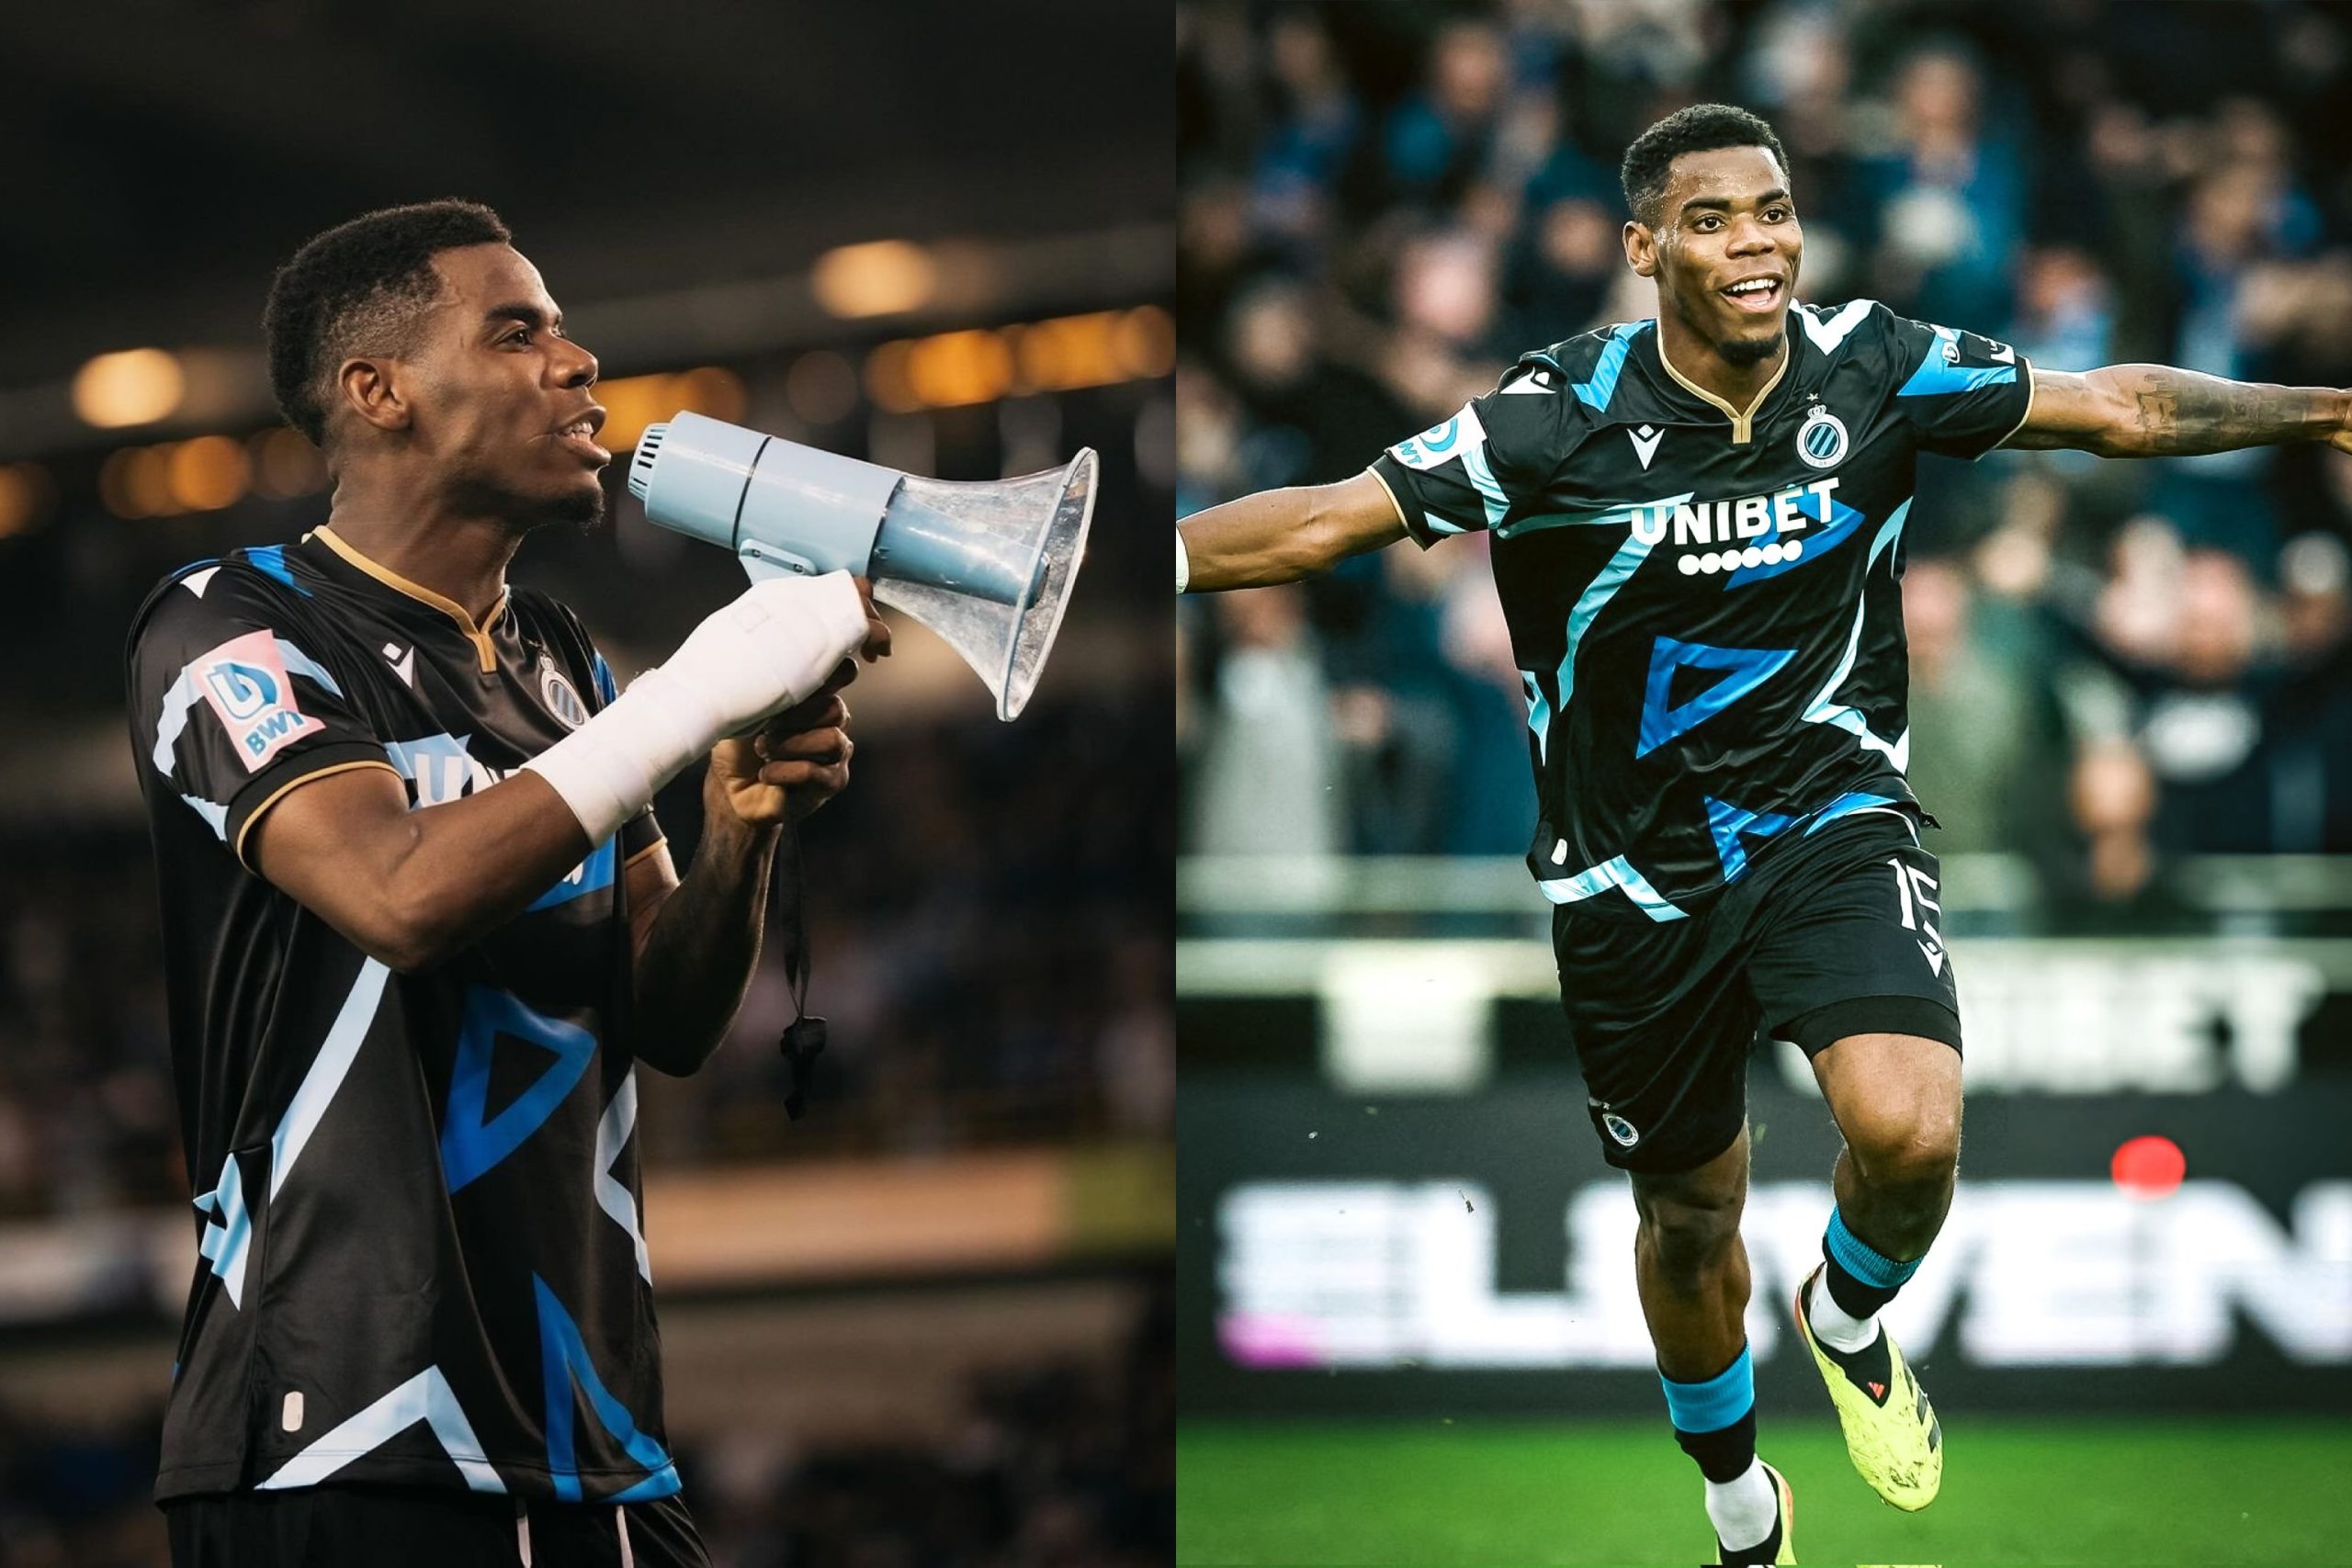 “I lengthy for extra” – Raphael Onyedika reacts after scoring two long-range stunners in Membership Brugge’s victory over Anderlecht